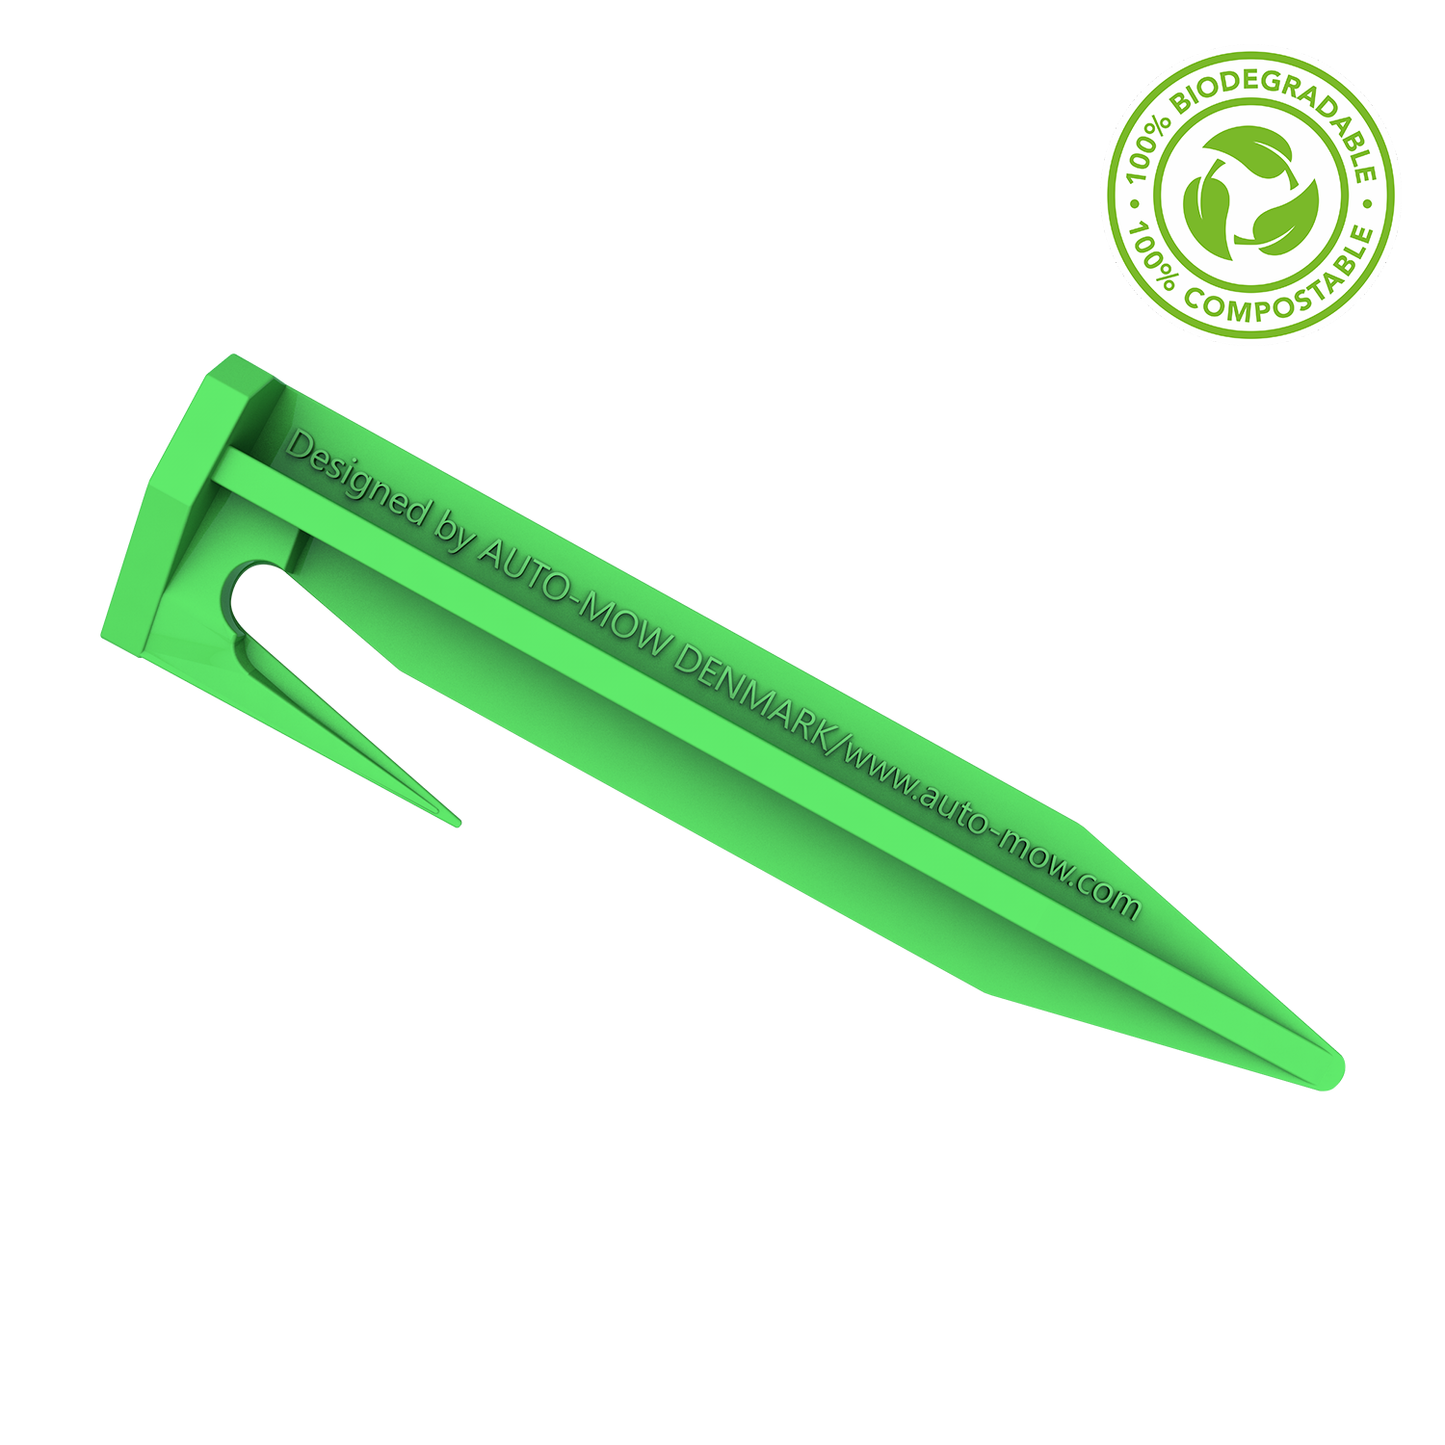 Auto-Mow 100 Pack 3 Inch Anchoring Landscape Stake Biodegradable Pegs / 8.5cm Sod Staples for Securing Weed Fabric, Landscape Fabric, Netting, and Blanket